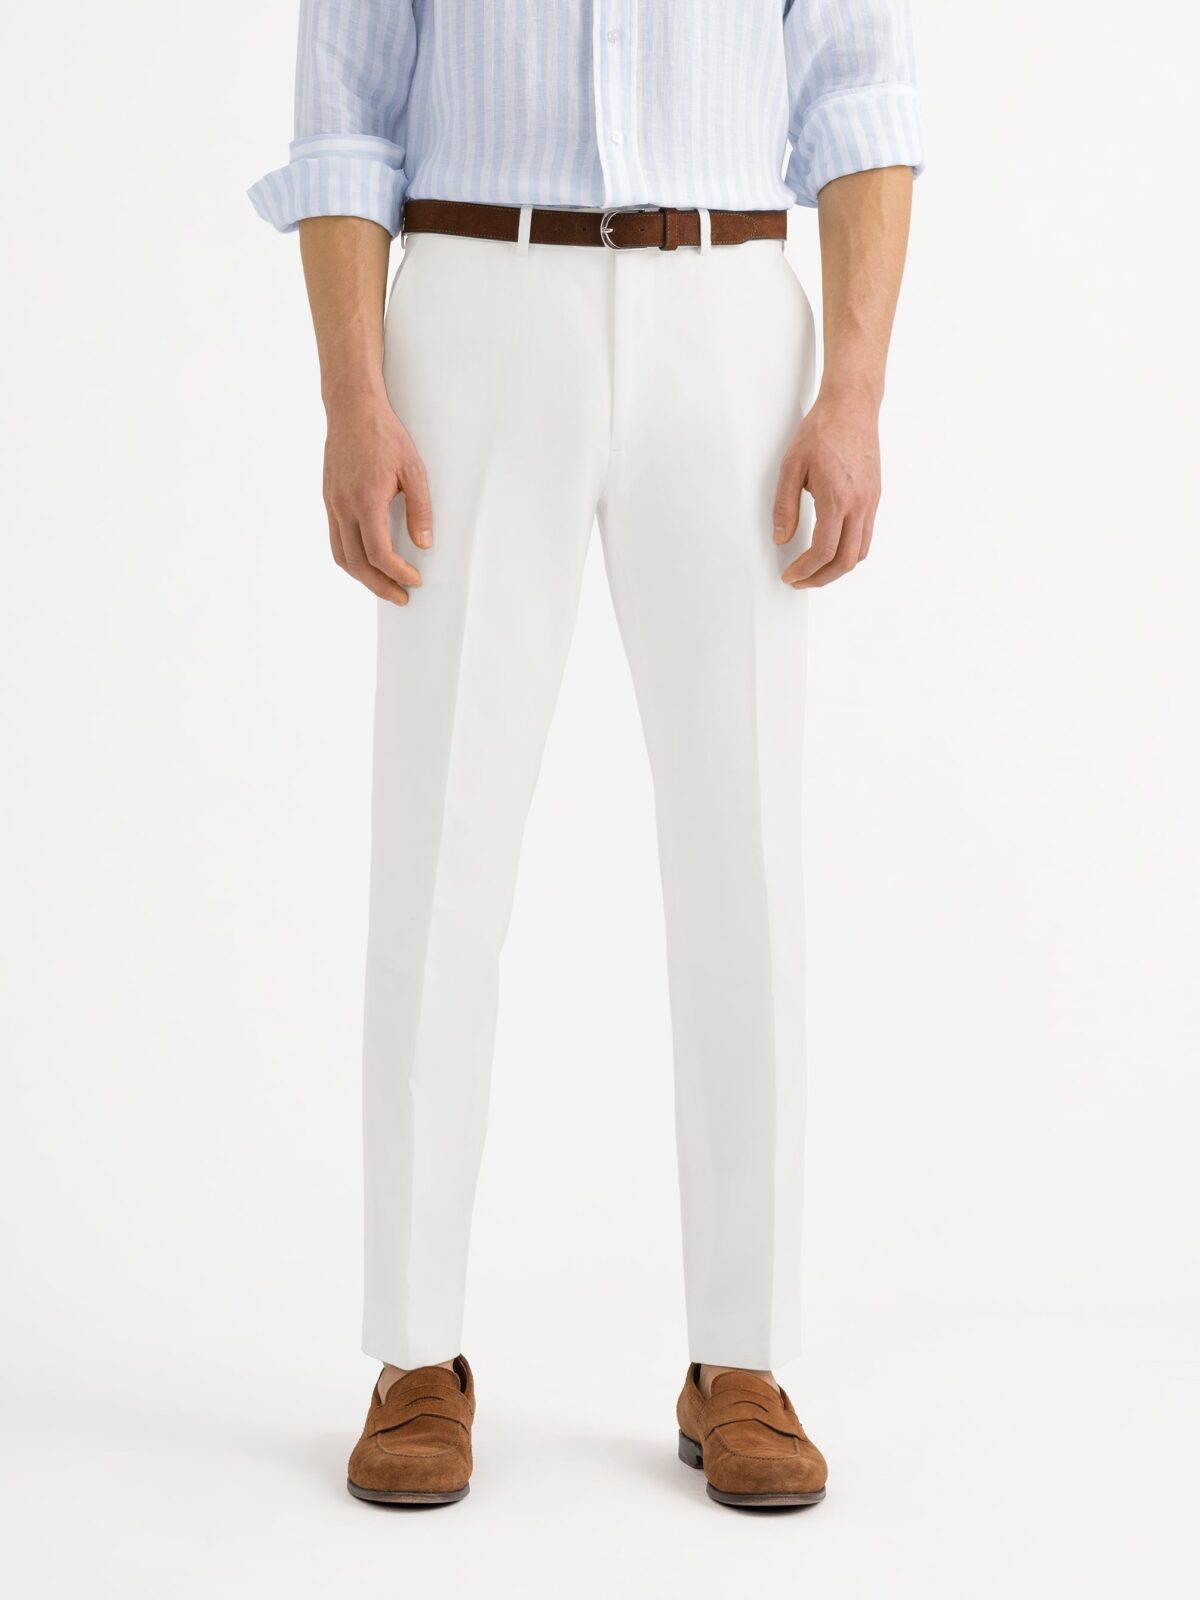 Double Pleated White Cotton and Linen Dress Pant - Custom Fit